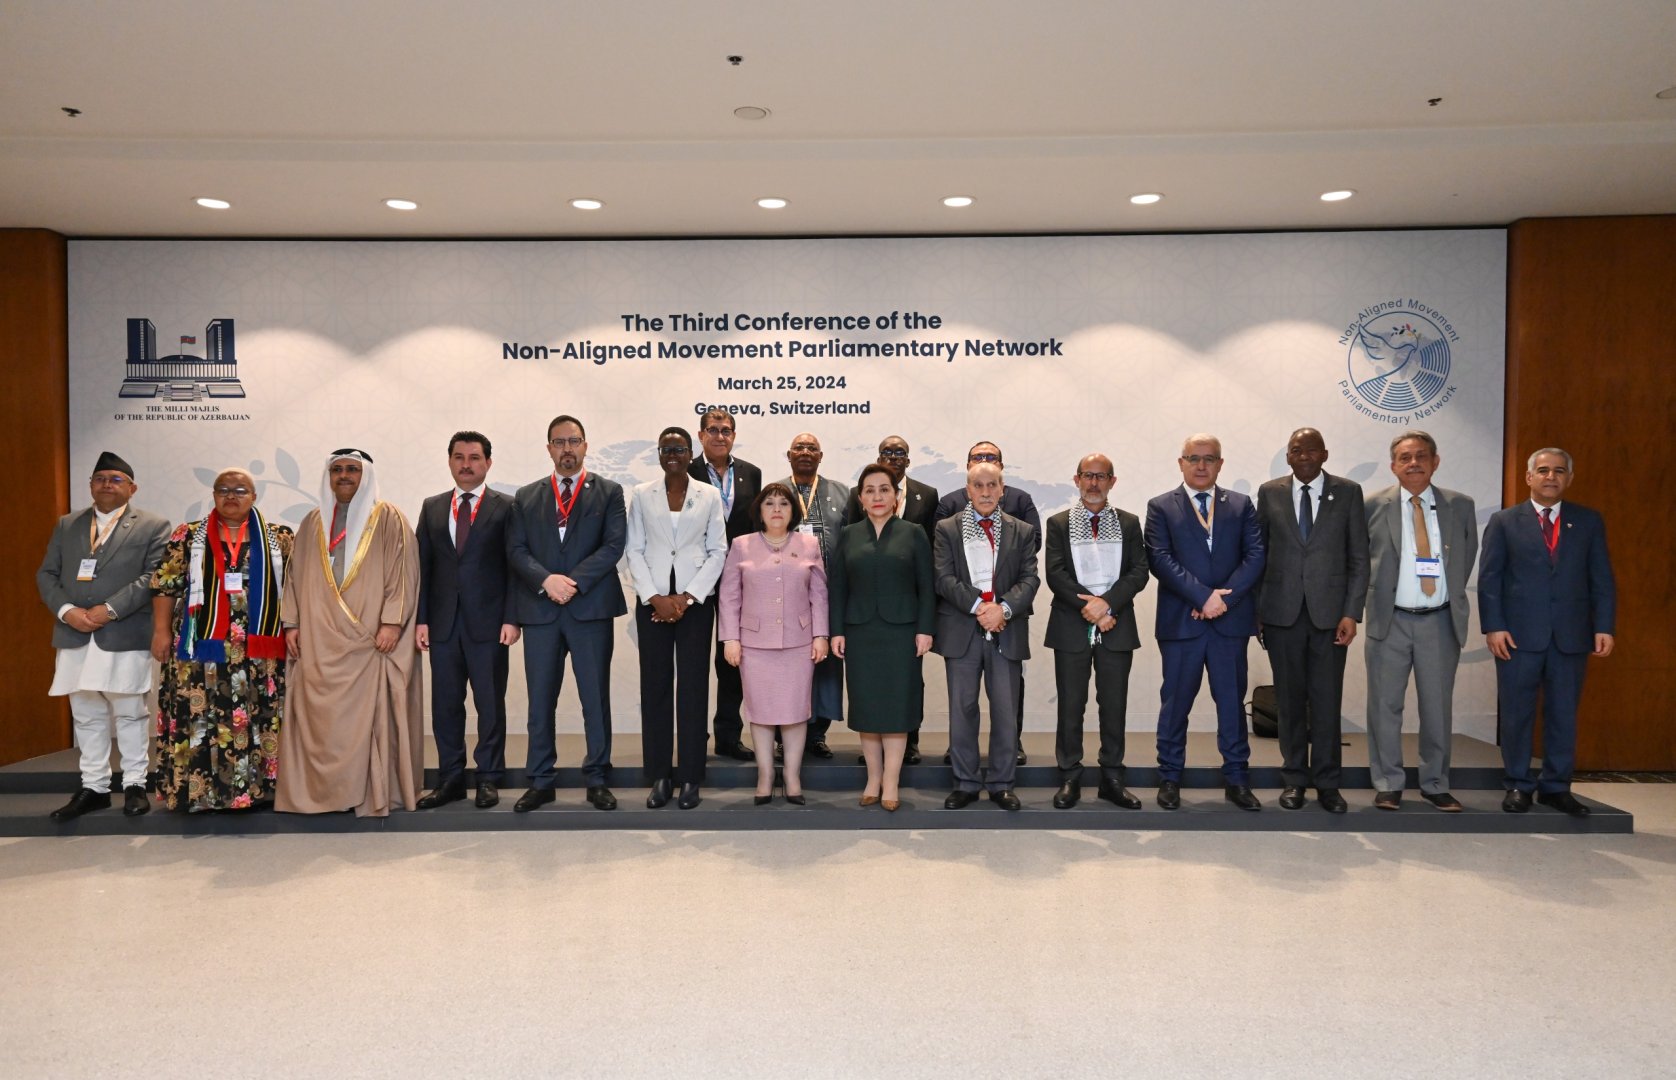 Geneva hosts 3rd Conference of NAM Parliamentary Network (PHOTO)